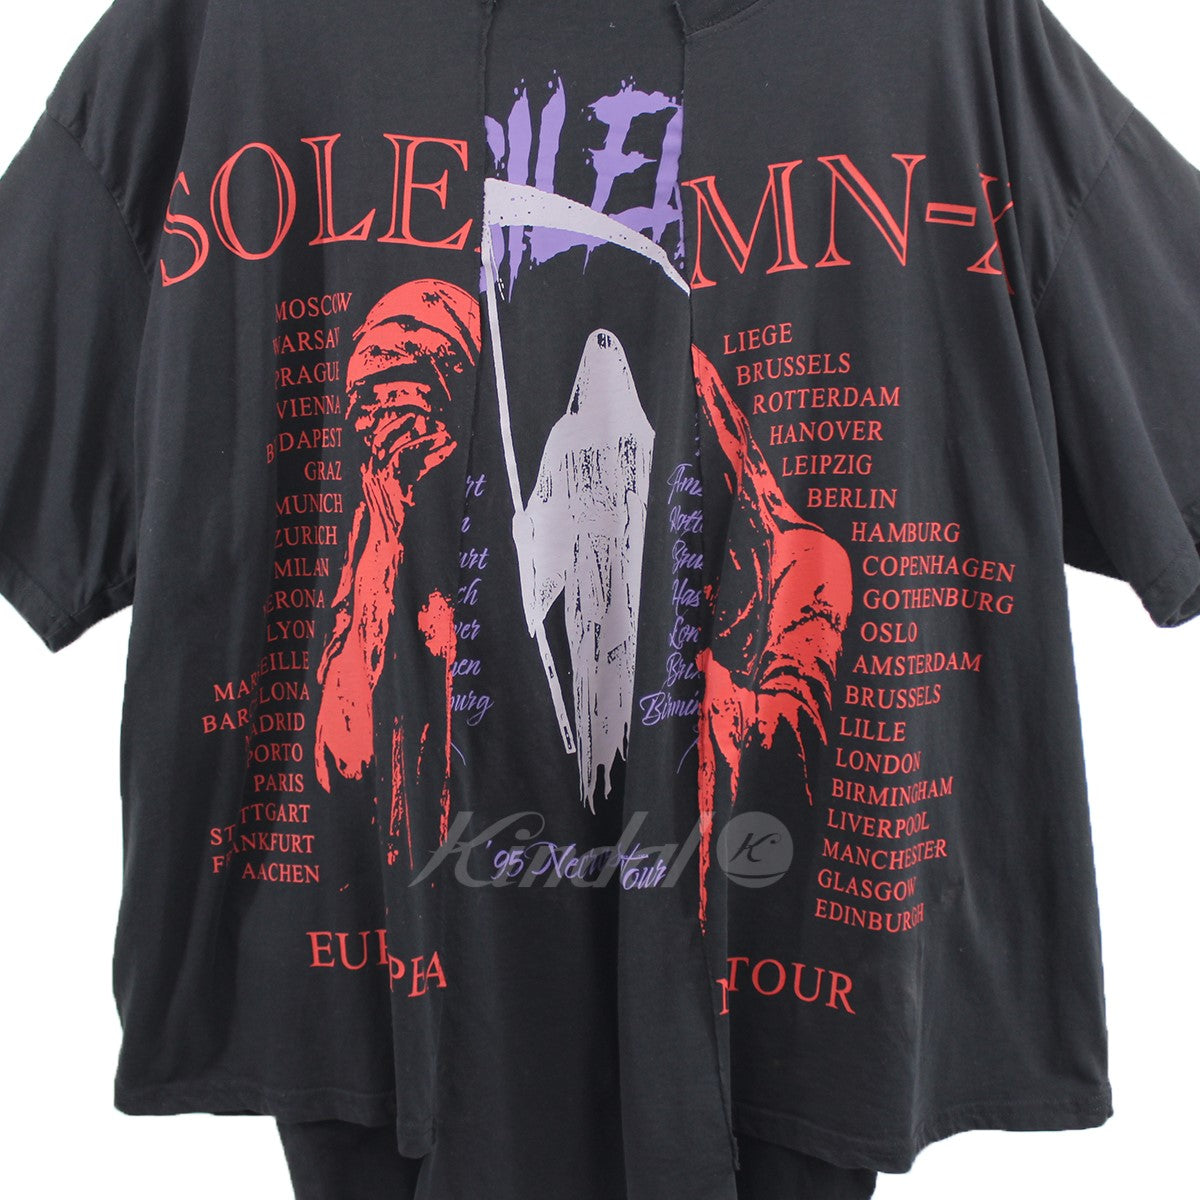 RAF SIMONS(ラフシモンズ) 稀少 22SS Solemn X Doubled T-Shirt ロゴ 